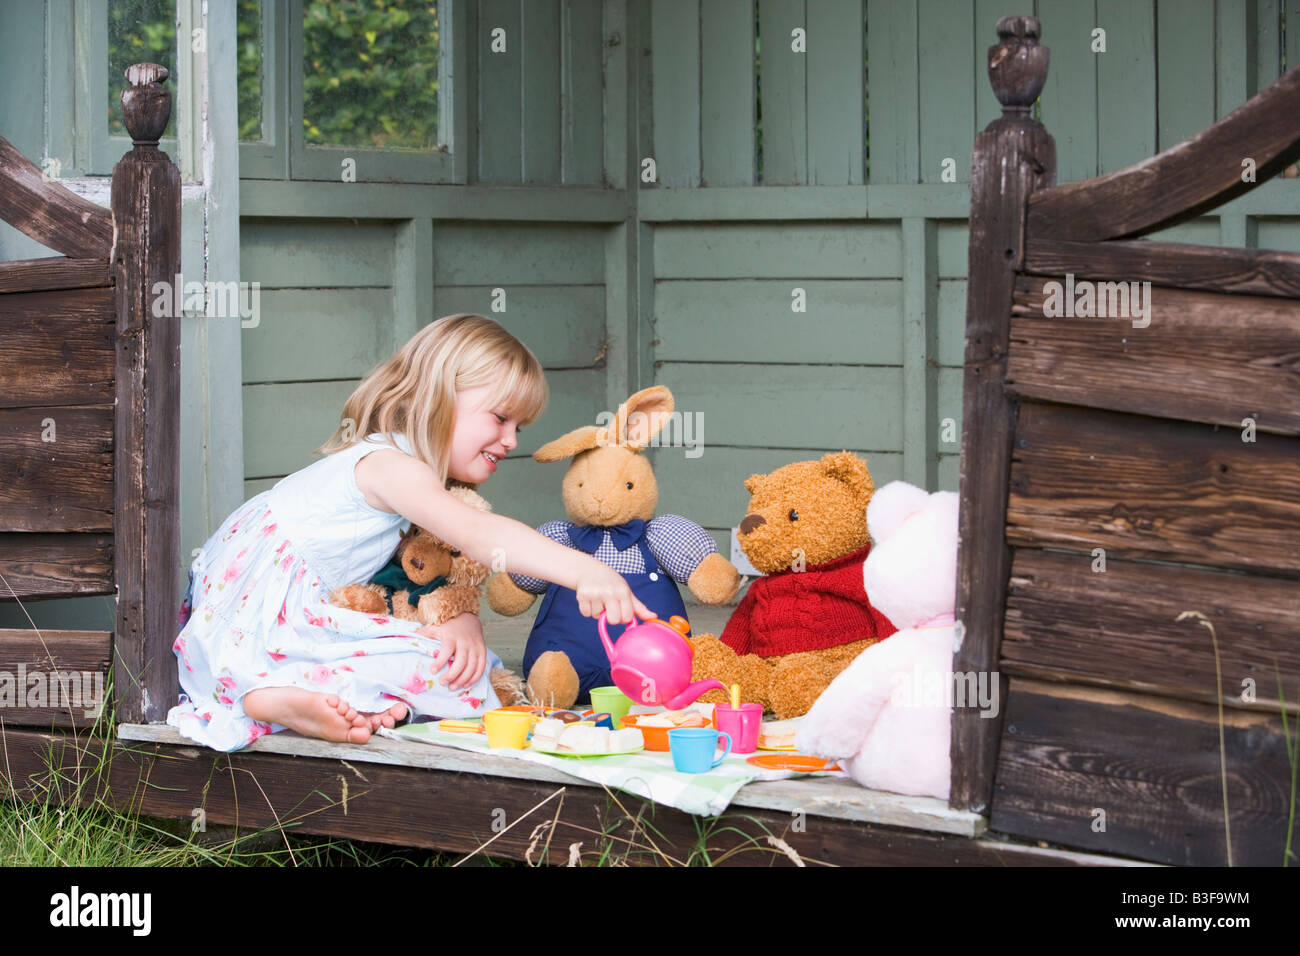 Young girl in shed playing tea and smiling Stock Photo